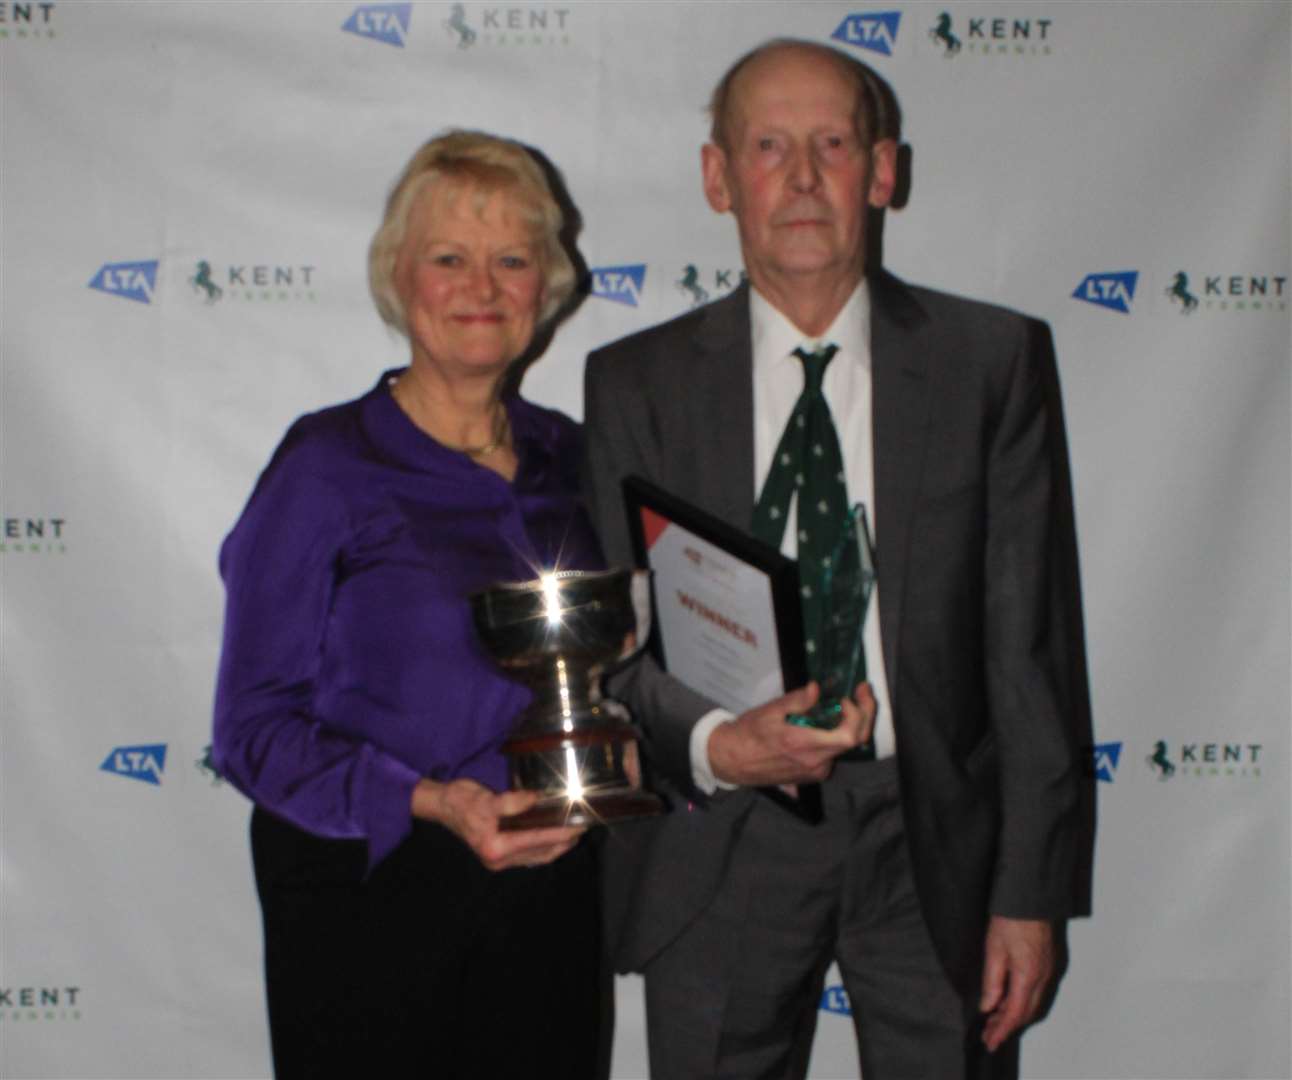 Stephen Woodley of Canterbury LTC, pictured with Kent Tennis president Mary Evans, won a lifetime achievement award